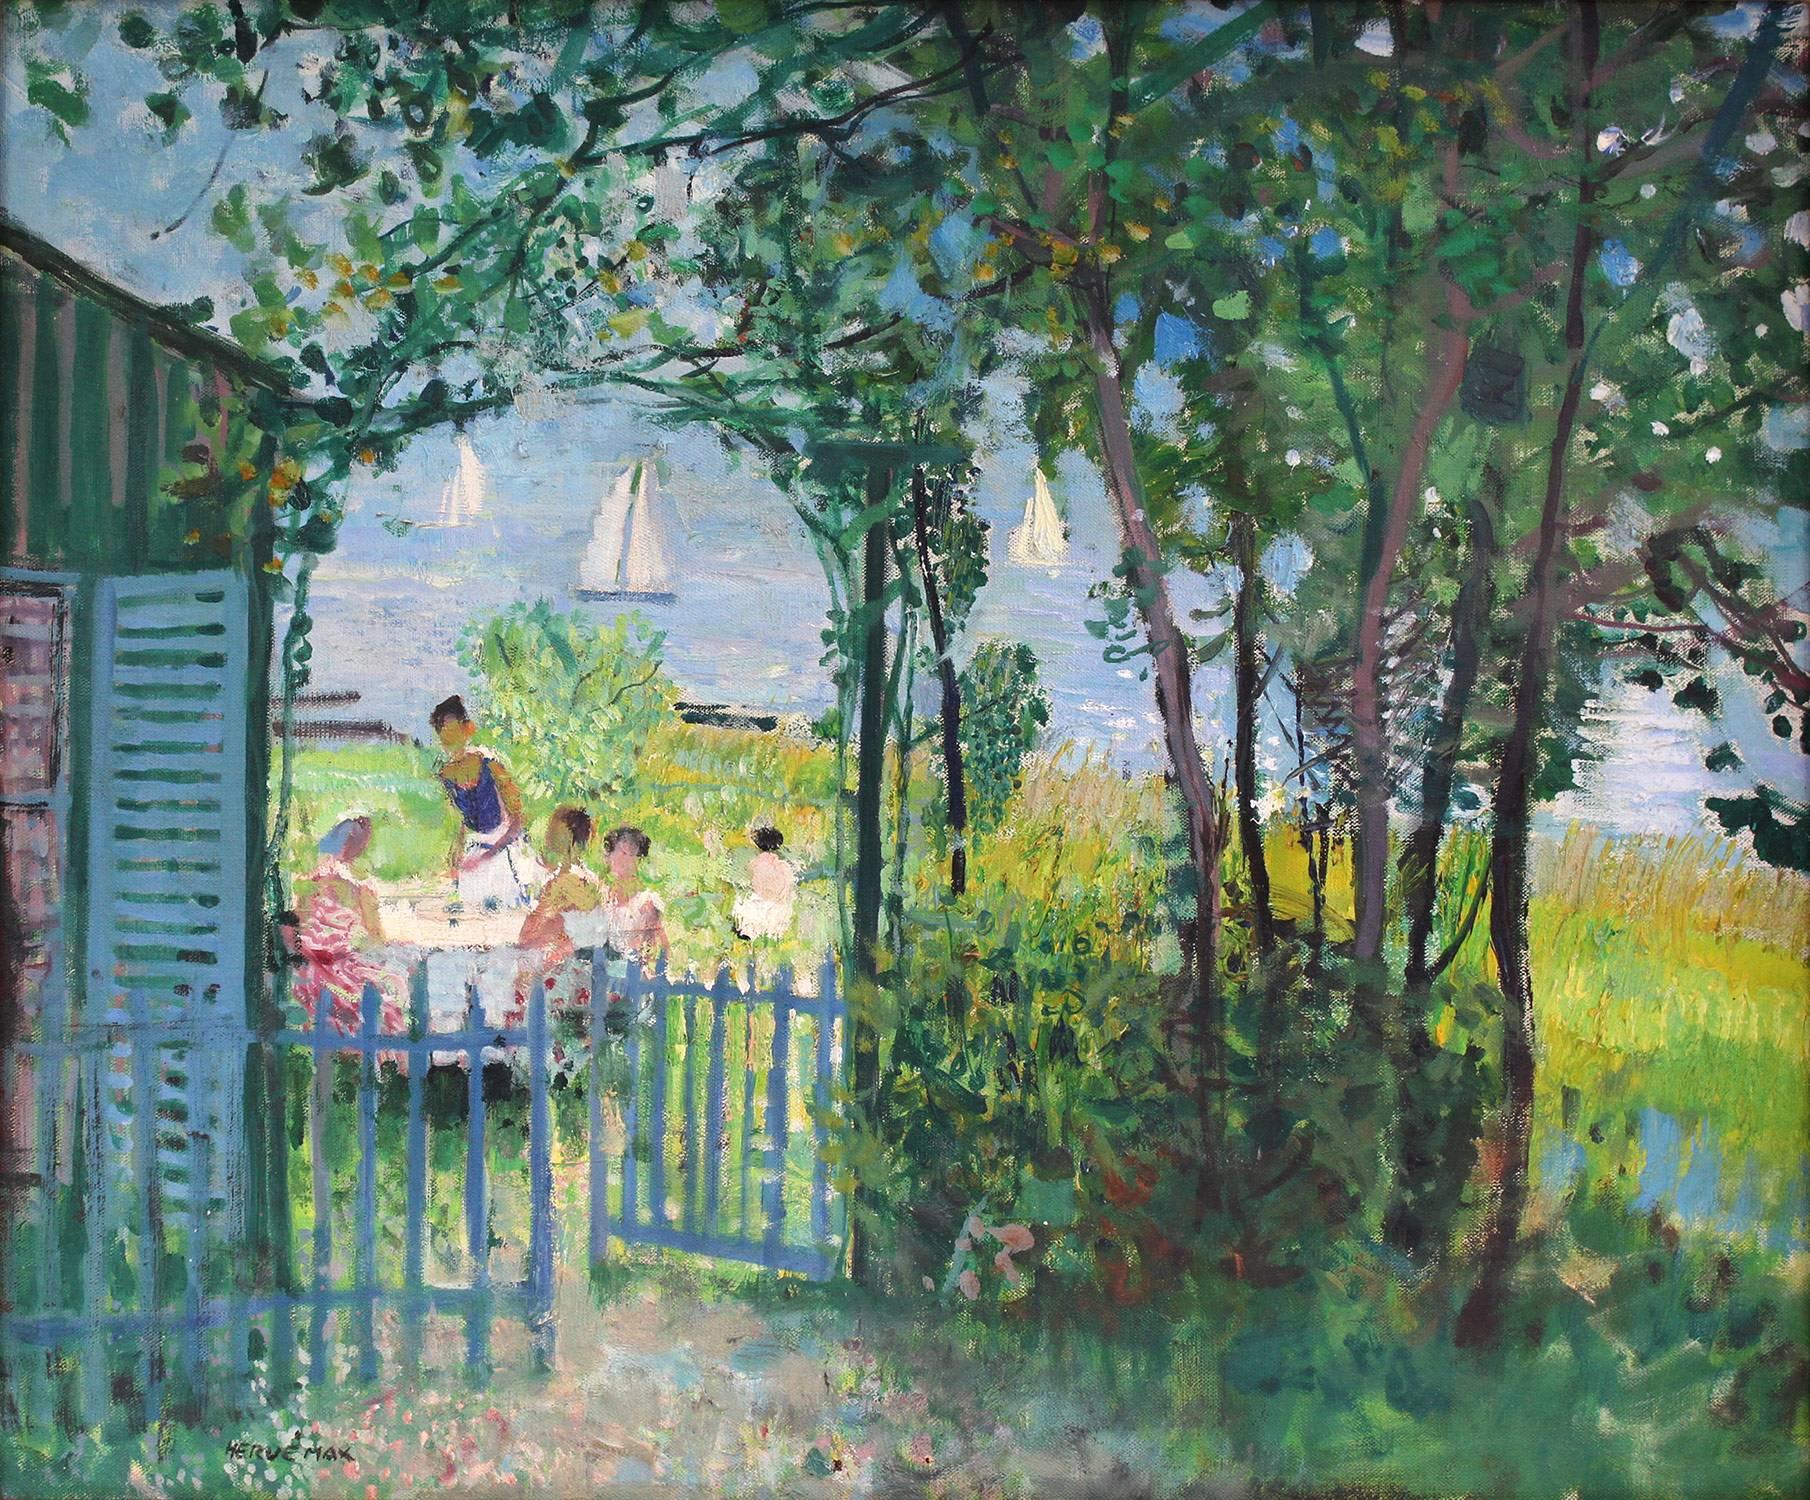 Lunch by the Courtyard Garden - Painting by Max Herve